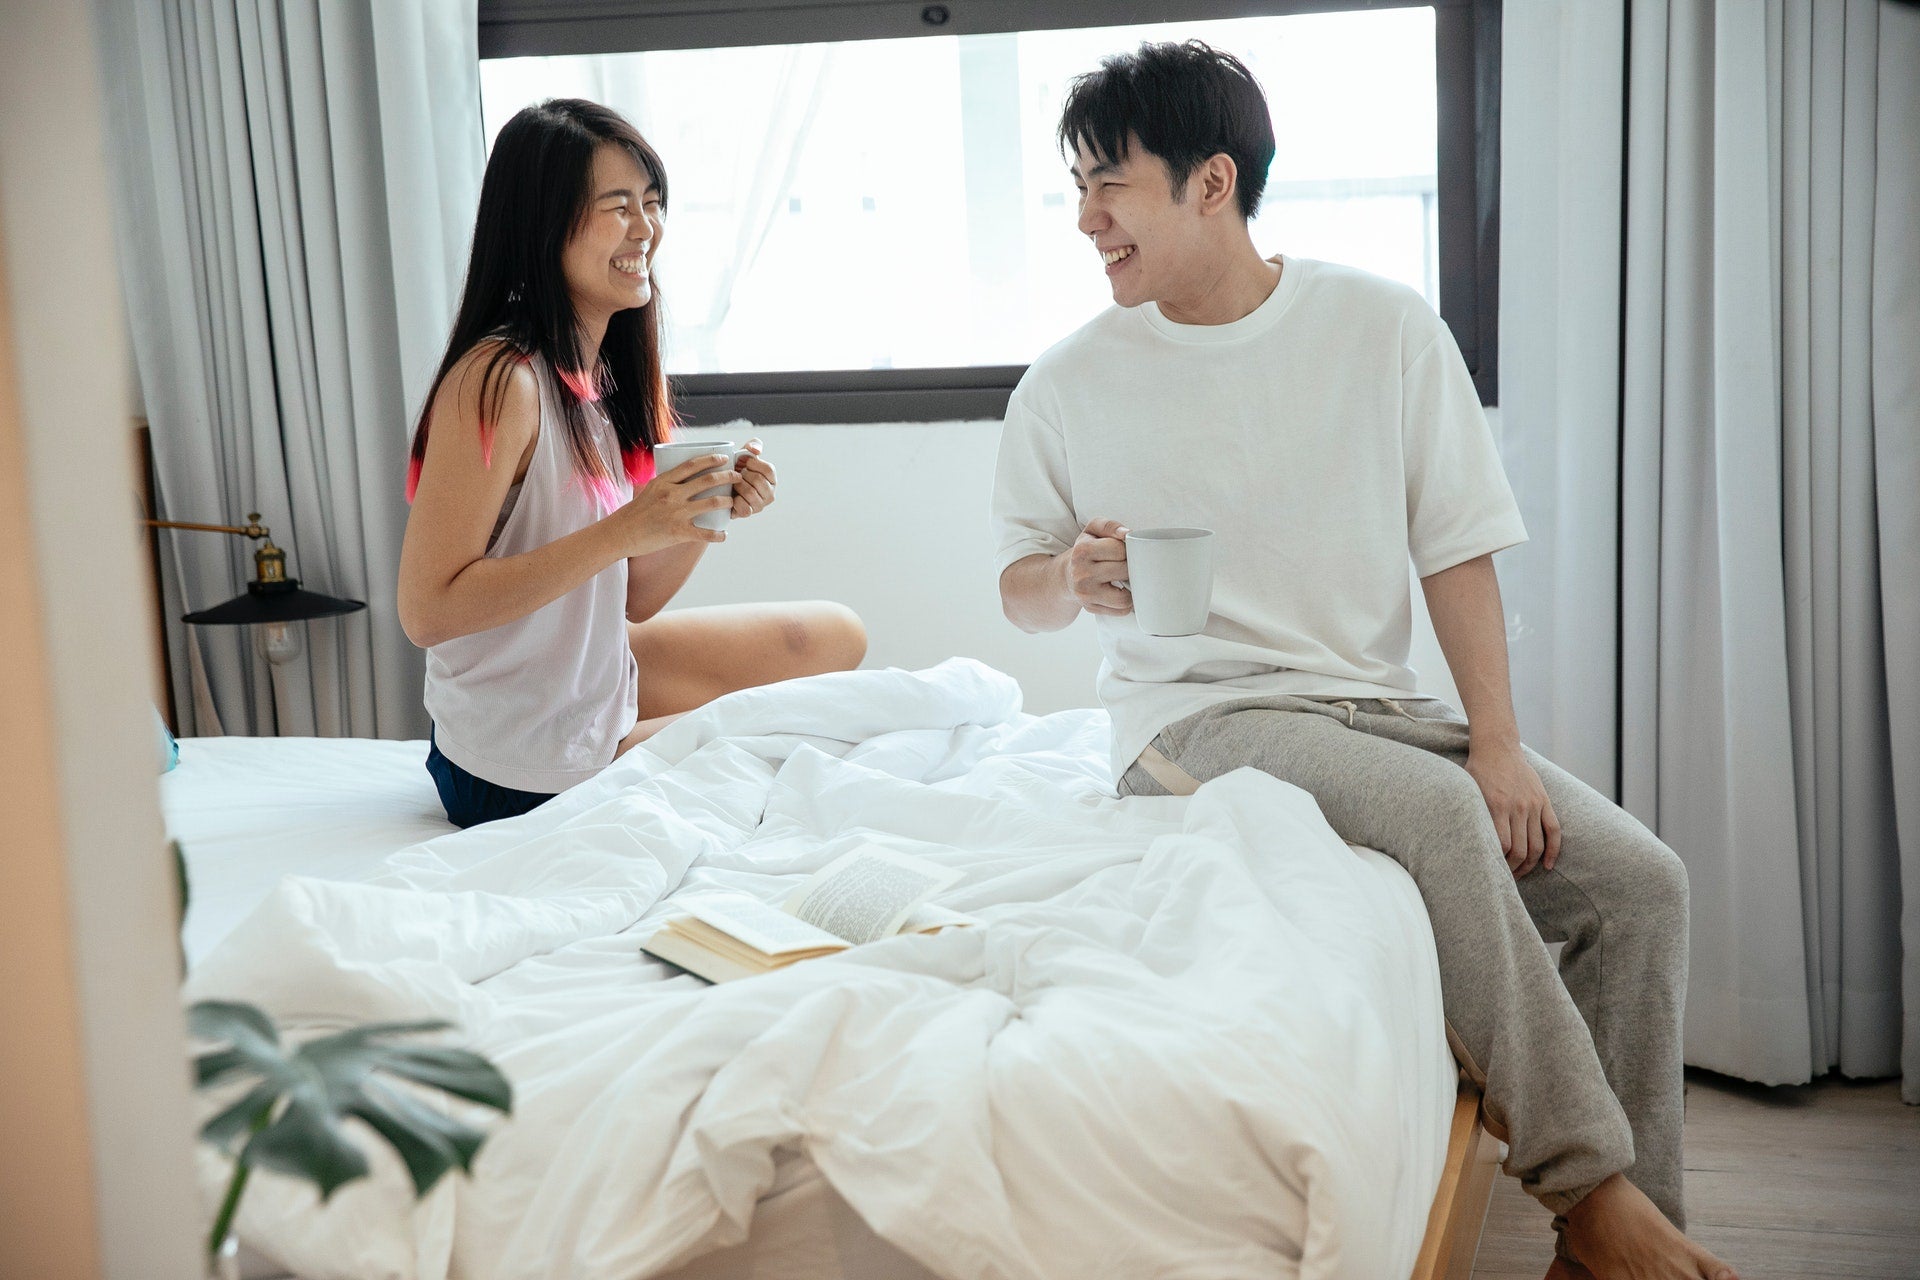 A couple talking to each other and laughing while sitting on a bed in their room, holding mugs